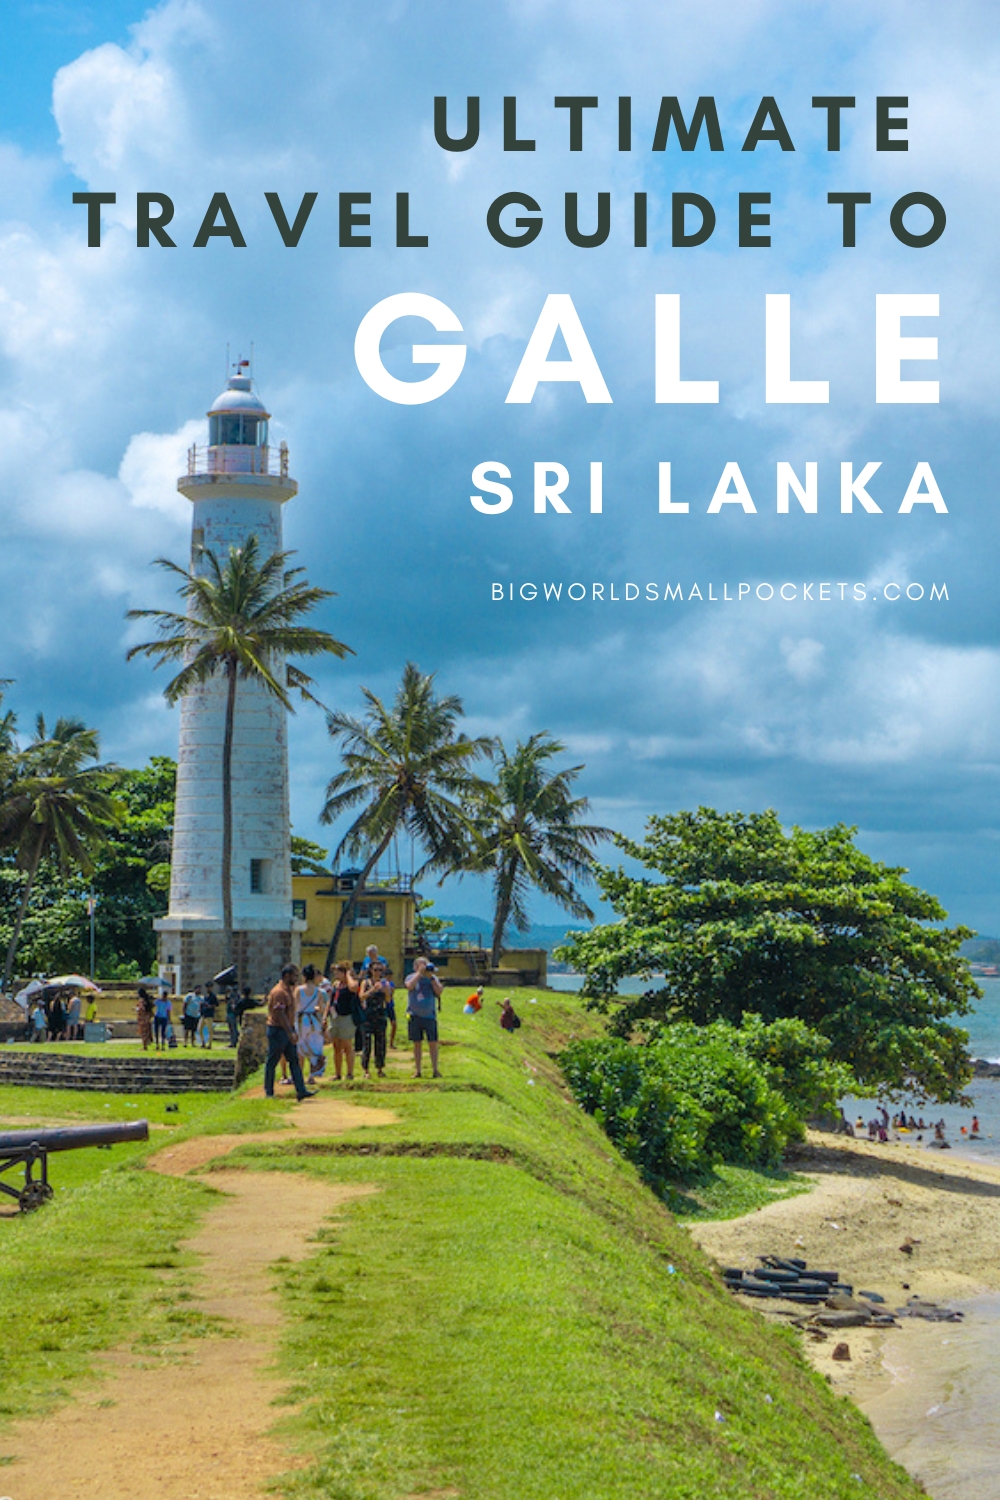 Ultimate Travel Guide to Galle, Sri Lanka